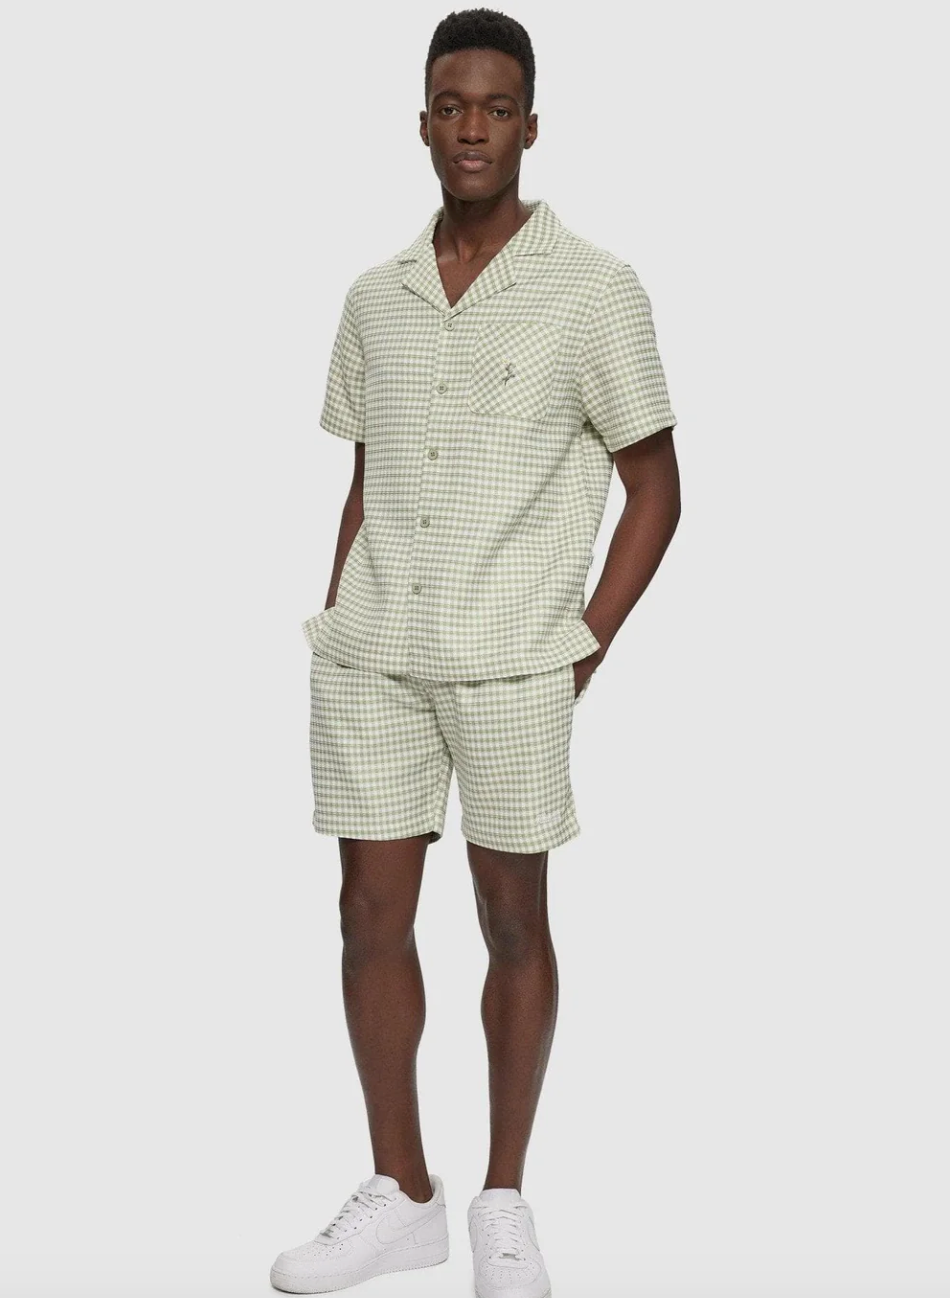 Available for Rental | Kuwallatee Checkered Shorts | Light Green